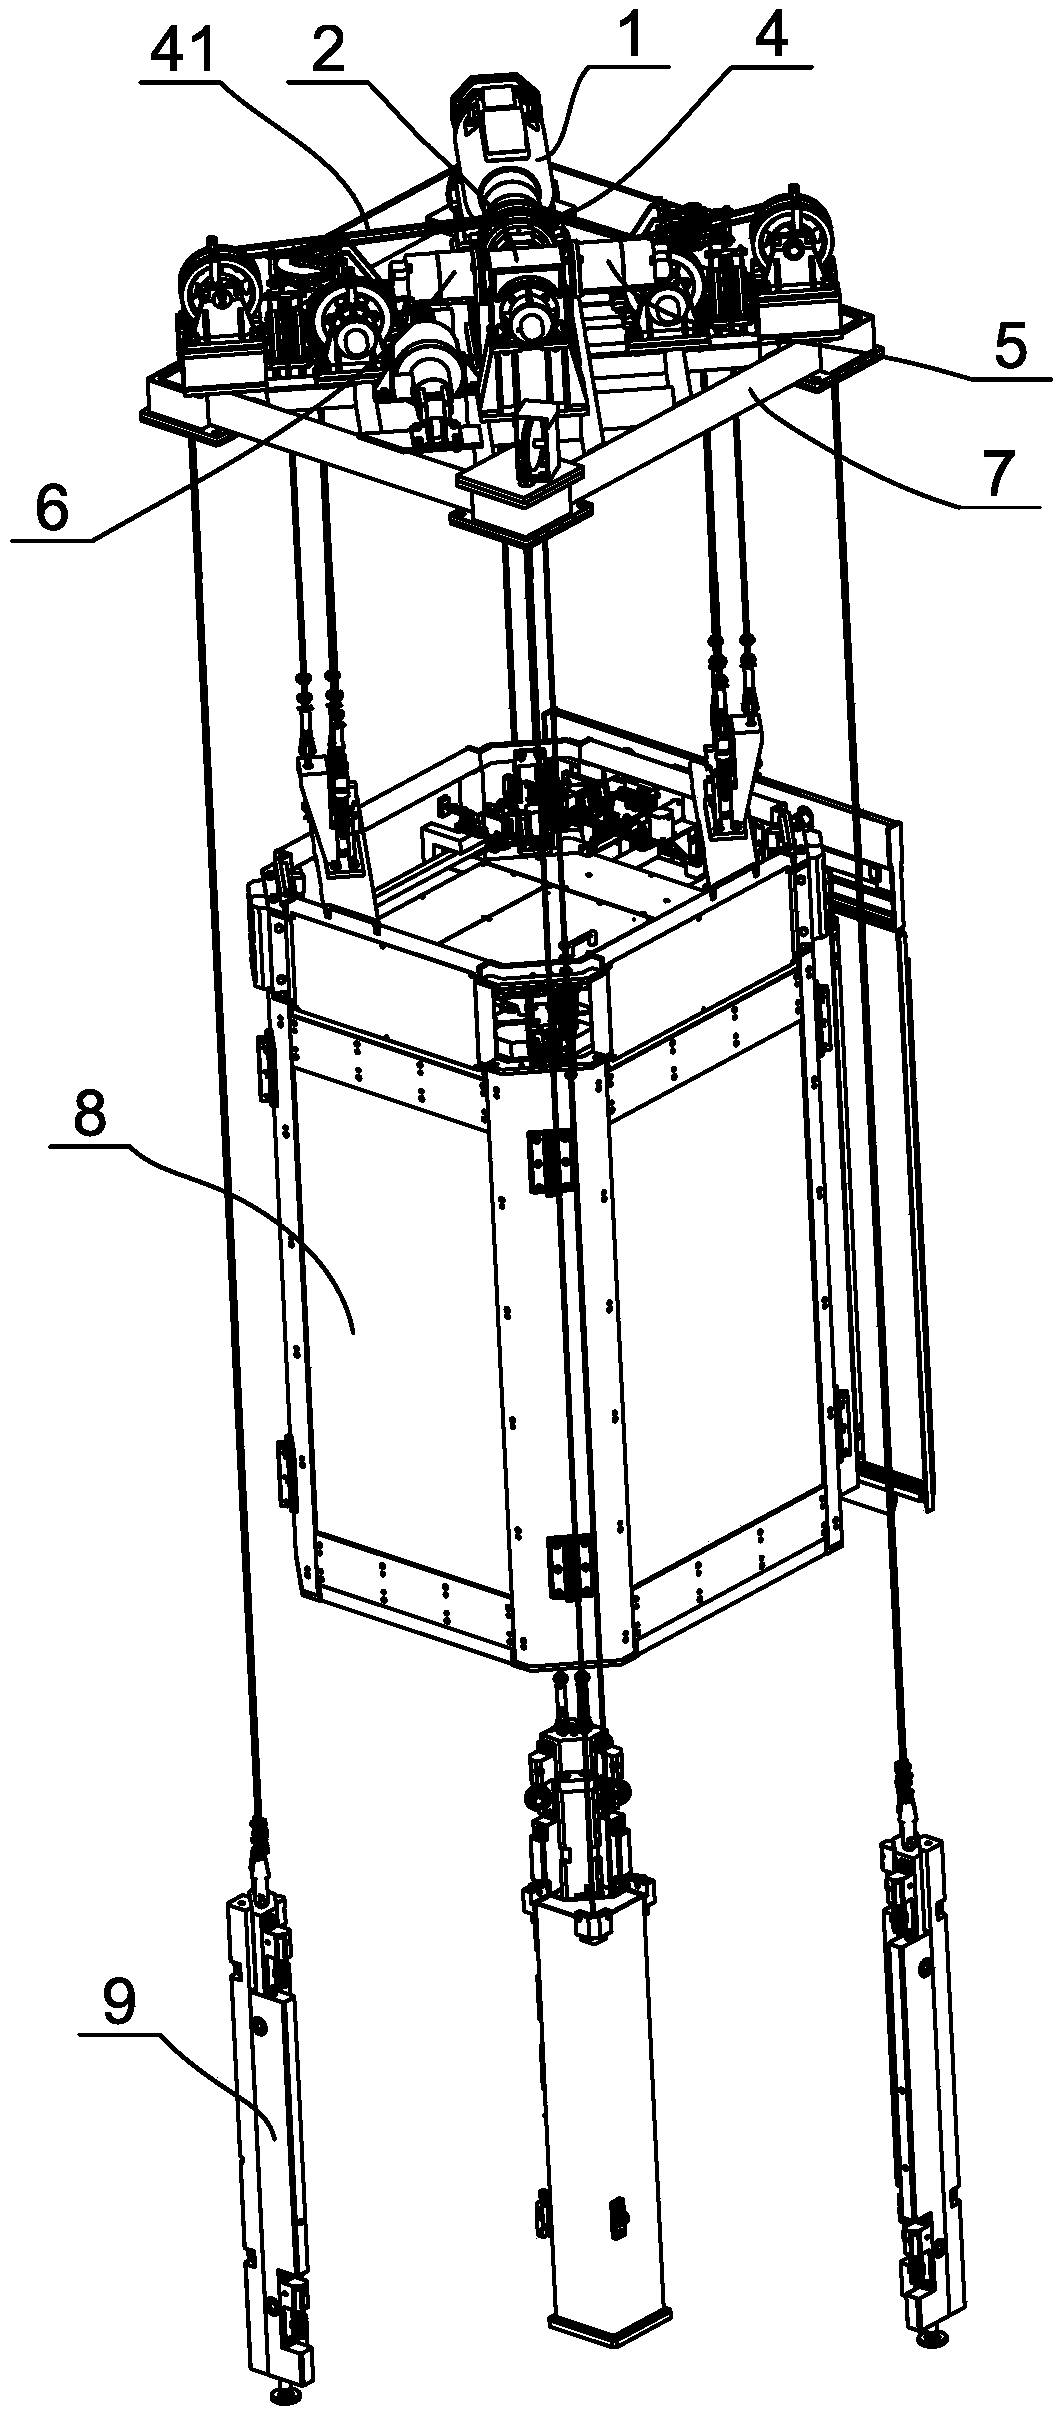 Traction device with manual rescue mechanism